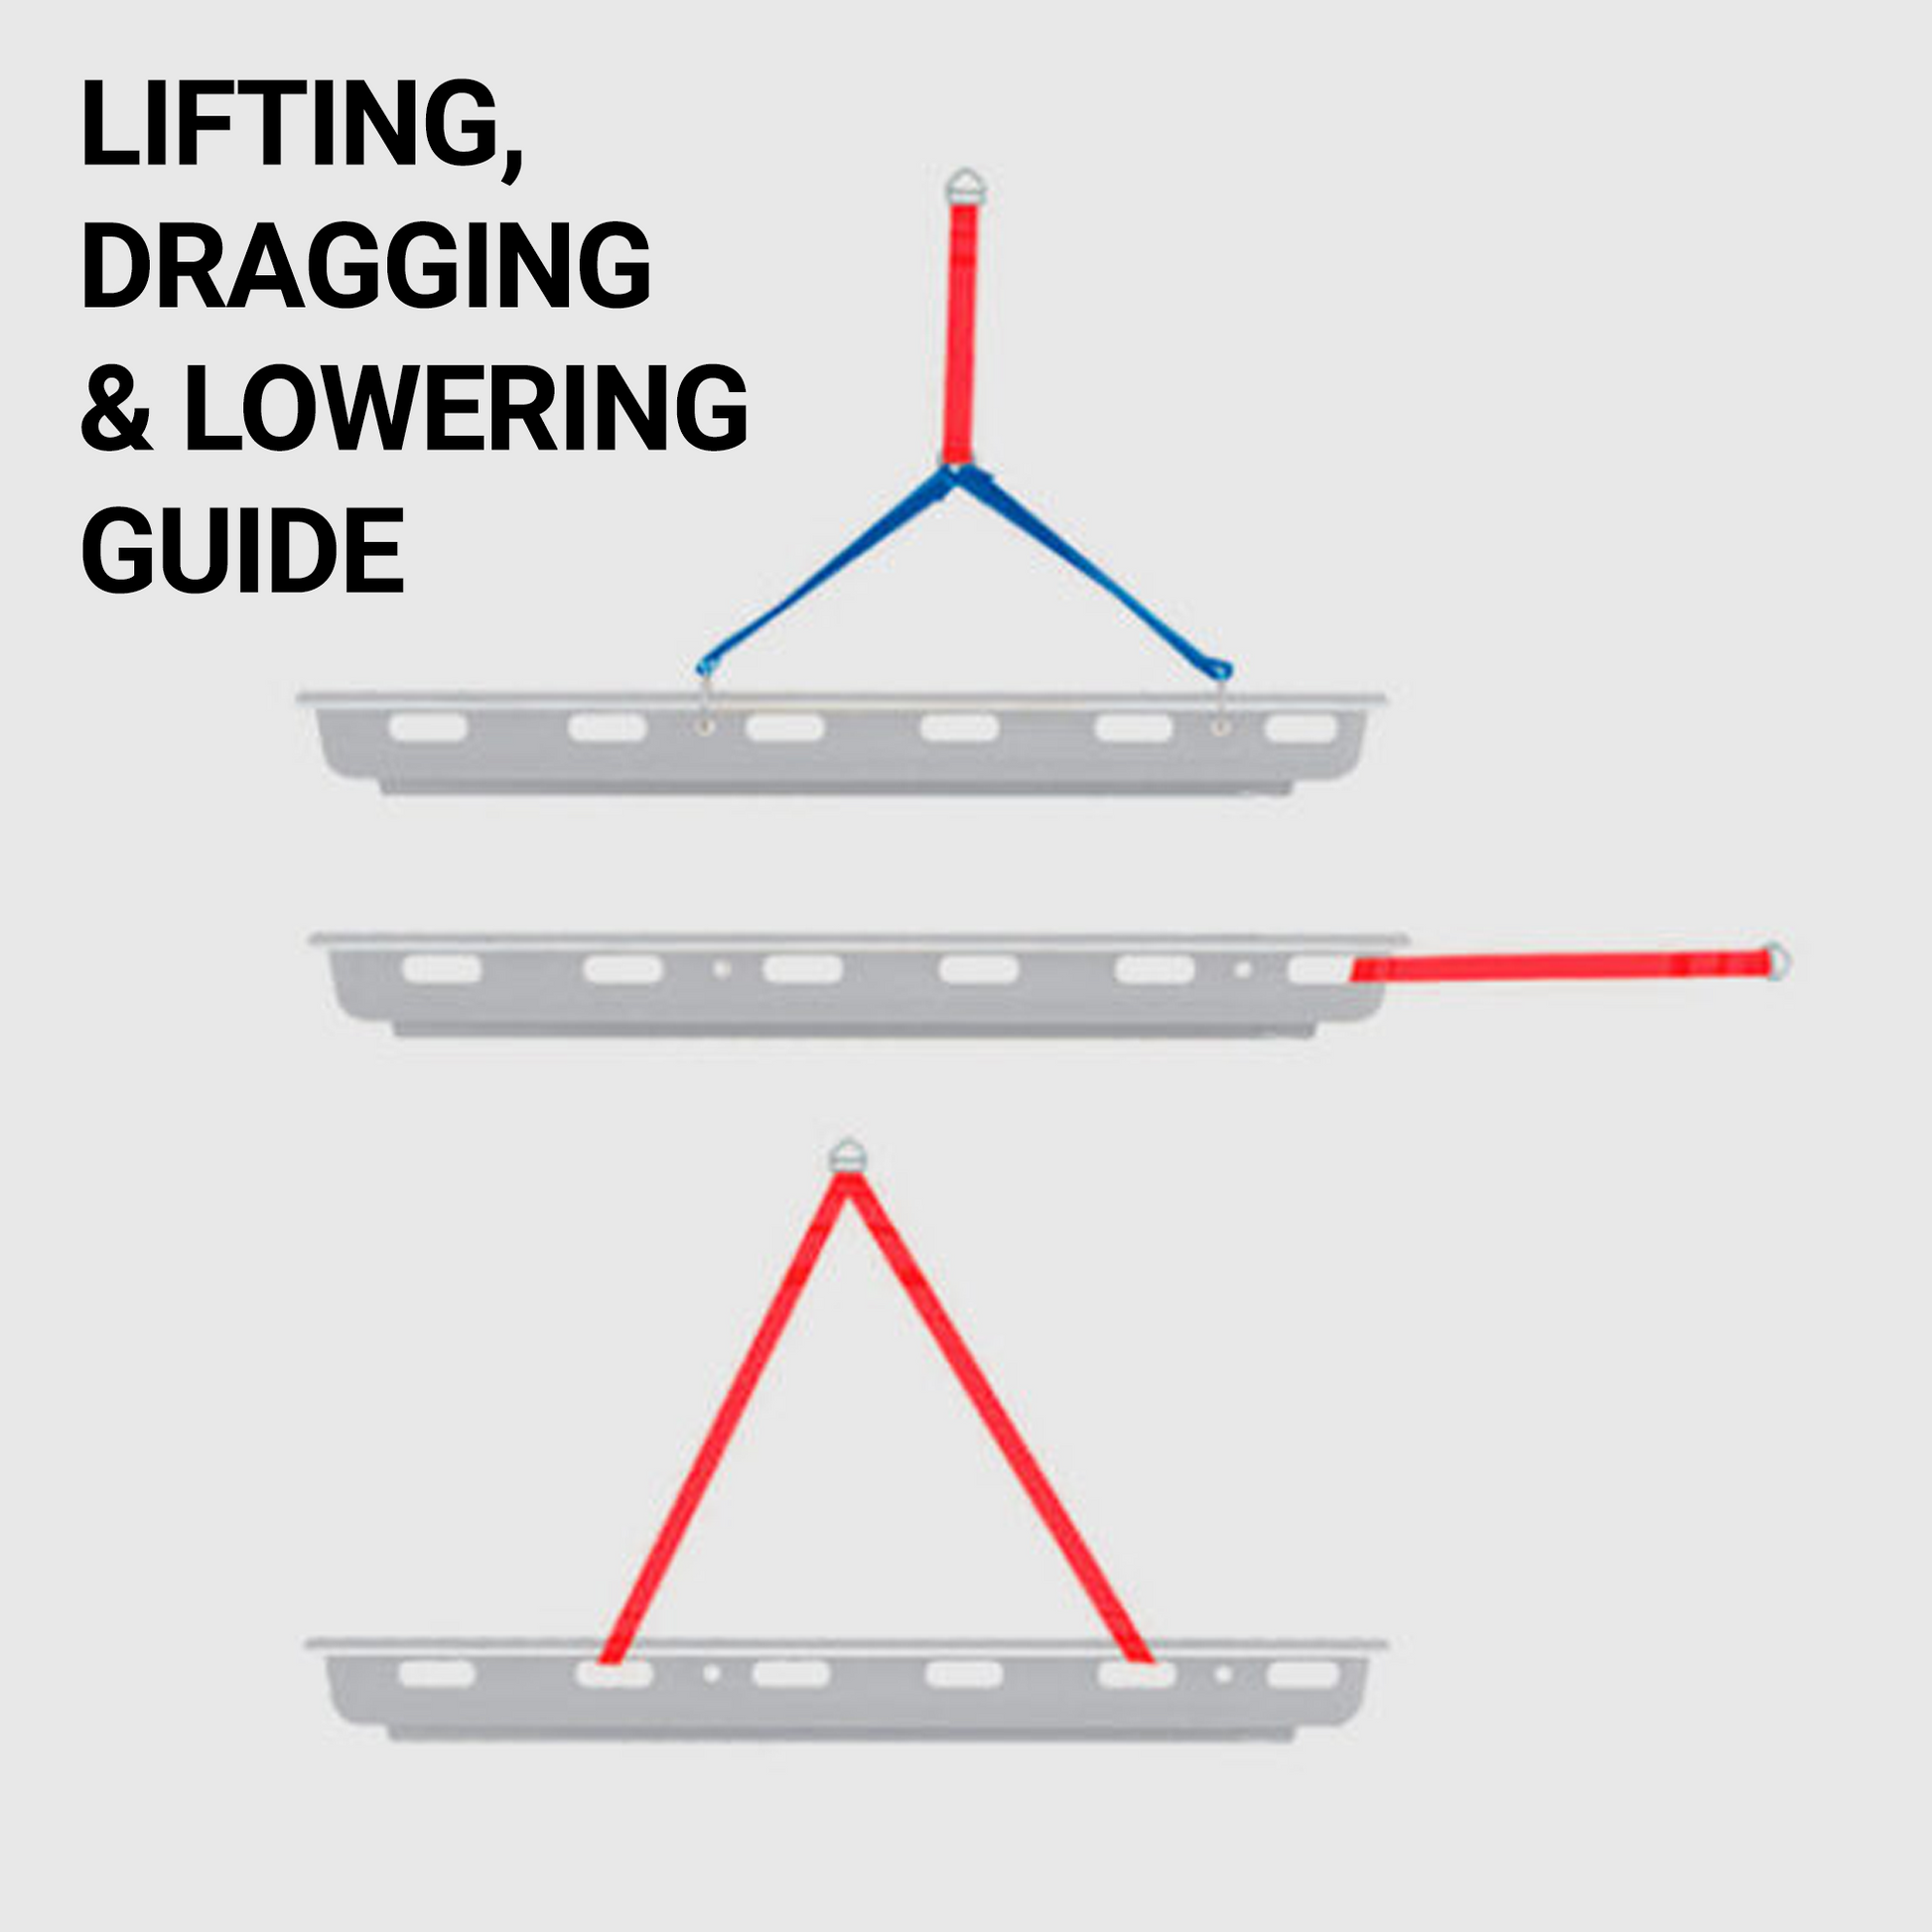 Lifting, dragging and lowering guide.